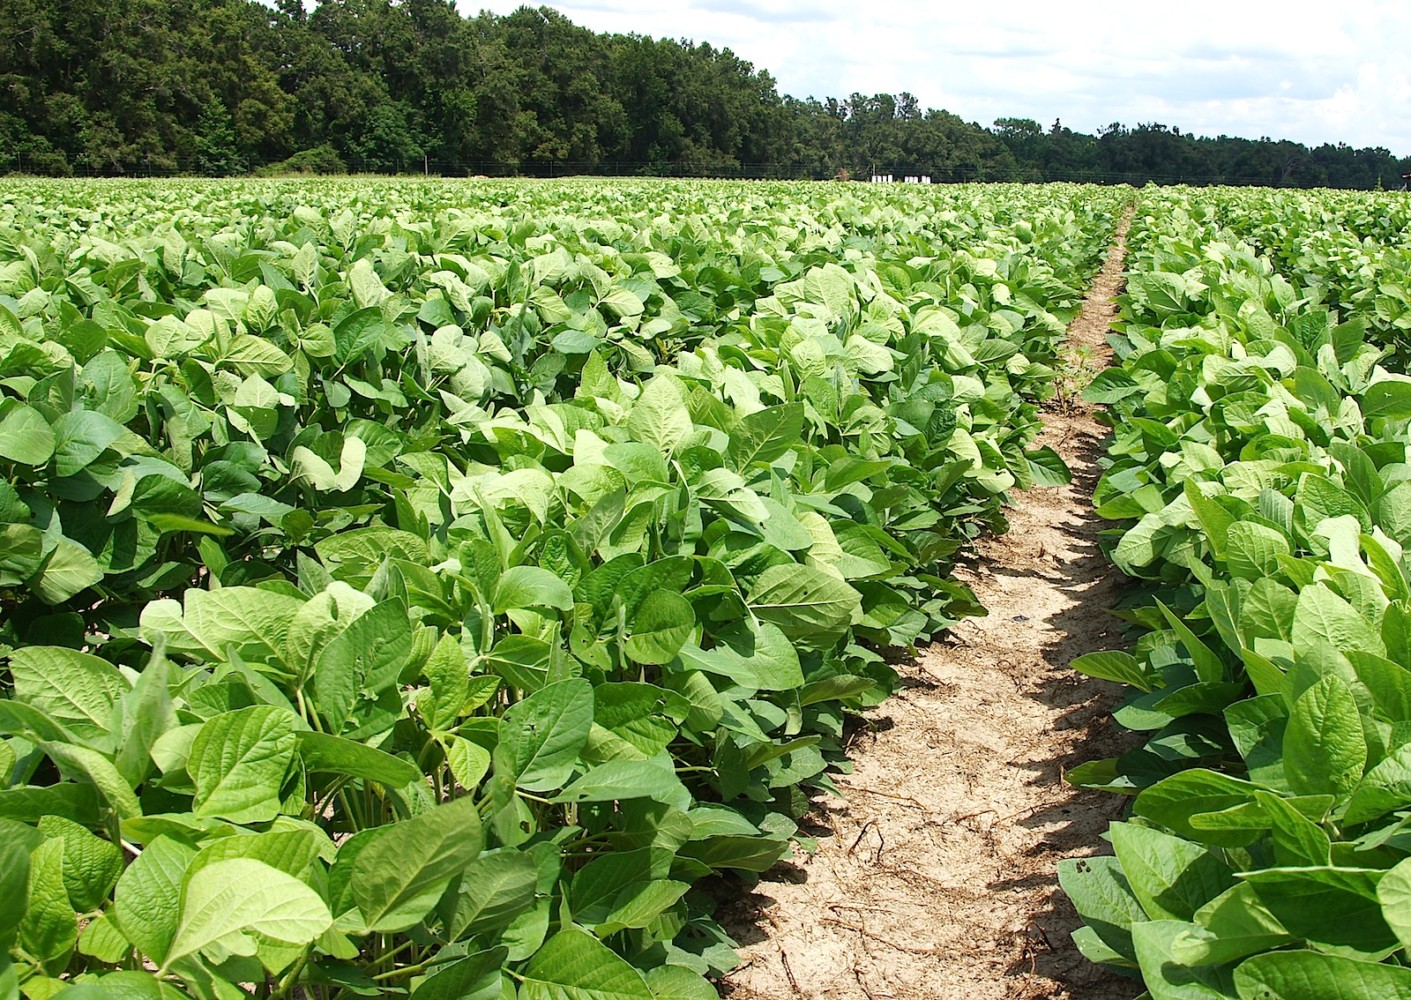 In 2019, S.C. farmers planted 335,000 acres of soybeans, a crop pesticide regulation officials say could be devestated with new herbicide restrictions. (Photo/Provided)